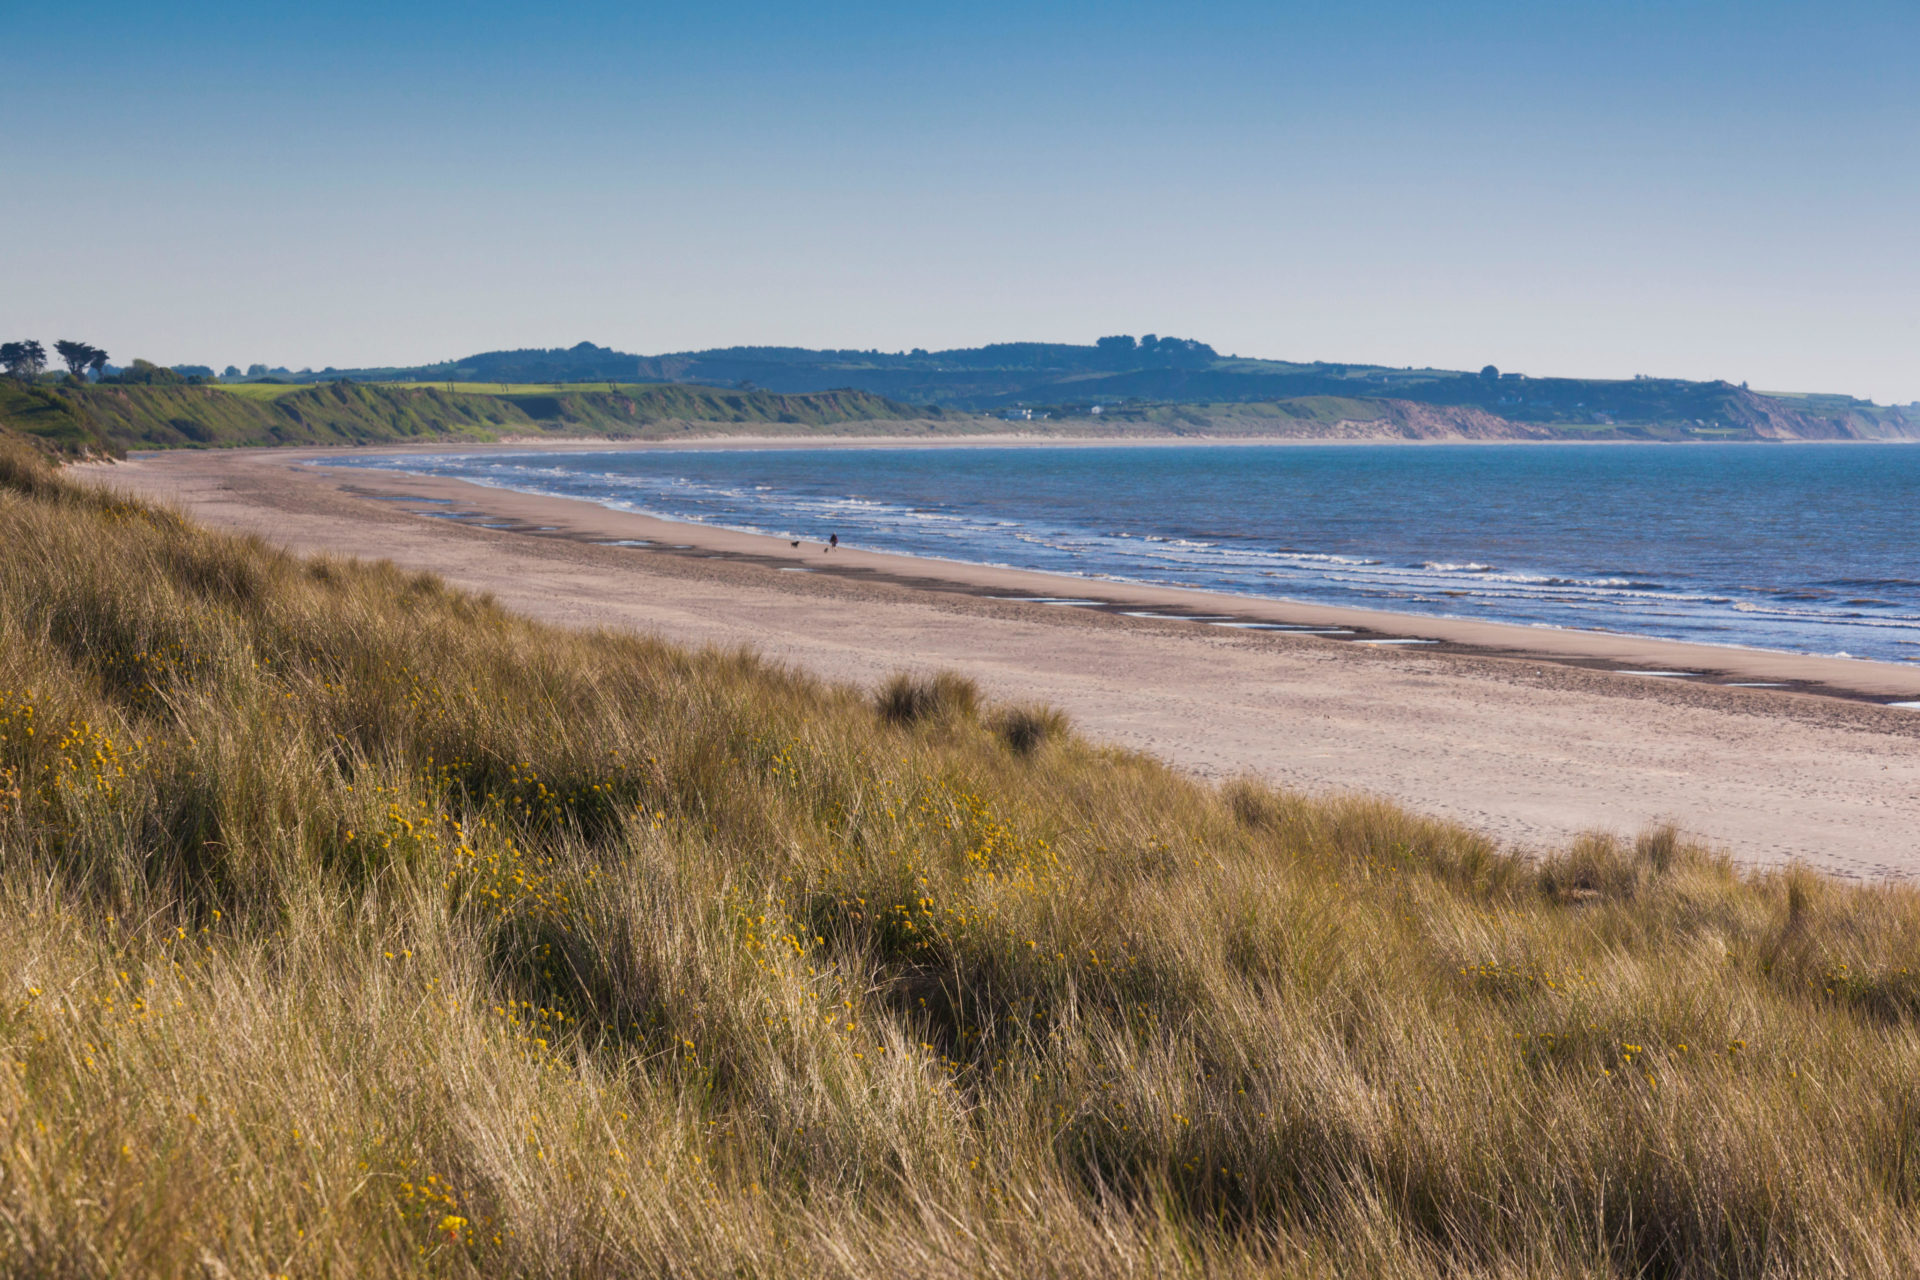 Curracloe Beach in Co Wexford, seen in this June 2016 file photo, was made famous as a stand-in for Omaha Beach in the film 'Saving Private Ryan'. 